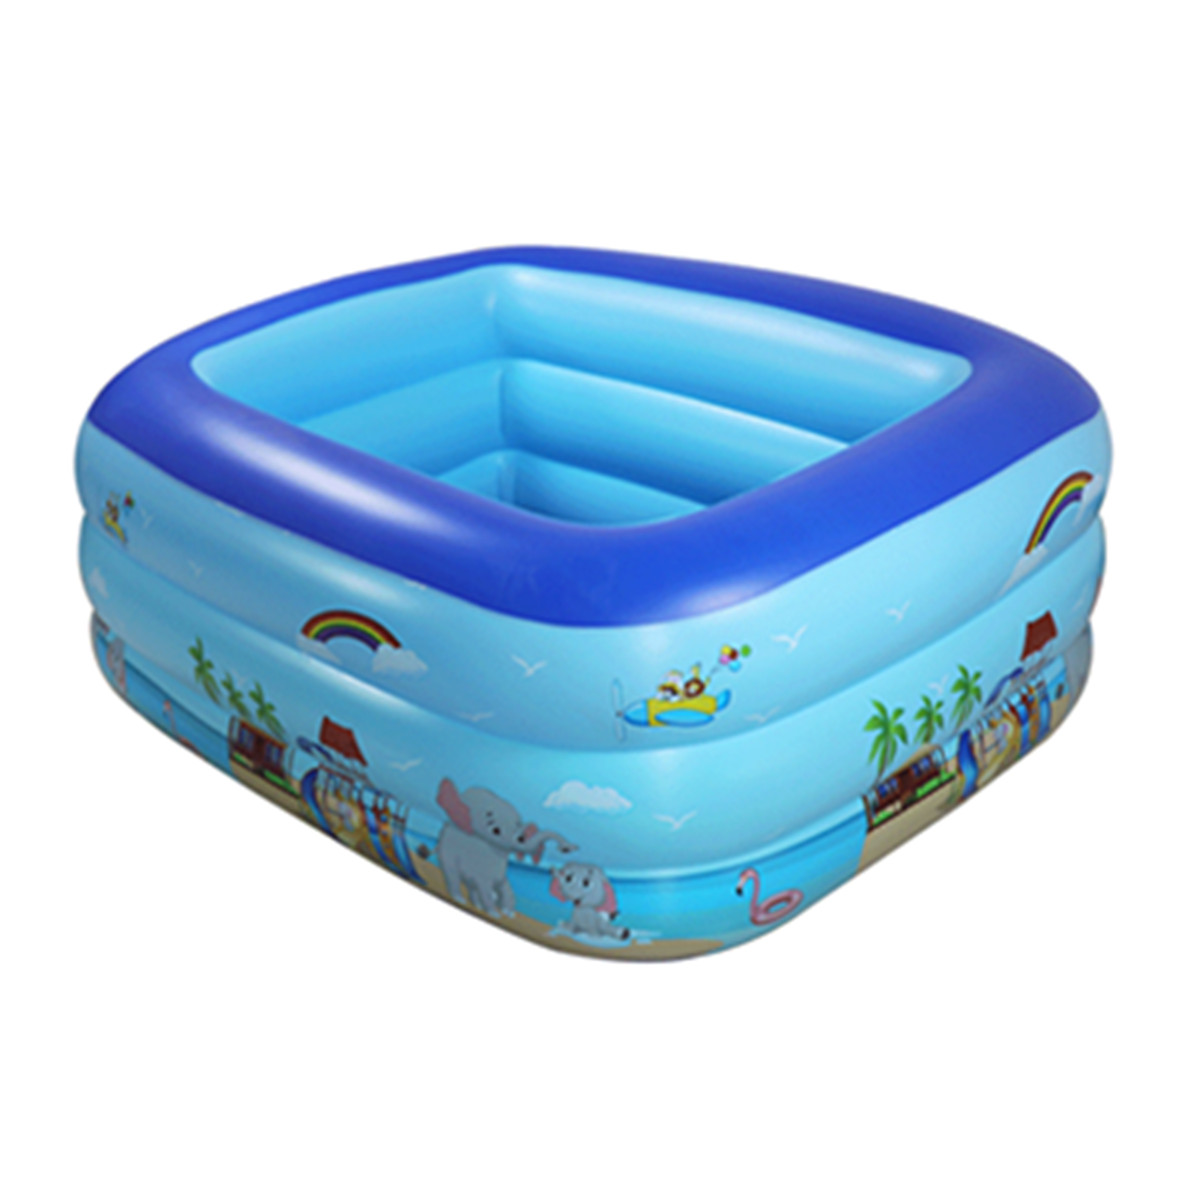 Thickened-PVC-Inflatable-Swimming-Pool-Childrens-Swimming-Pool-Bath-Tub-Outdoor-Indoor-Play-Pool-Chi-1856509-14